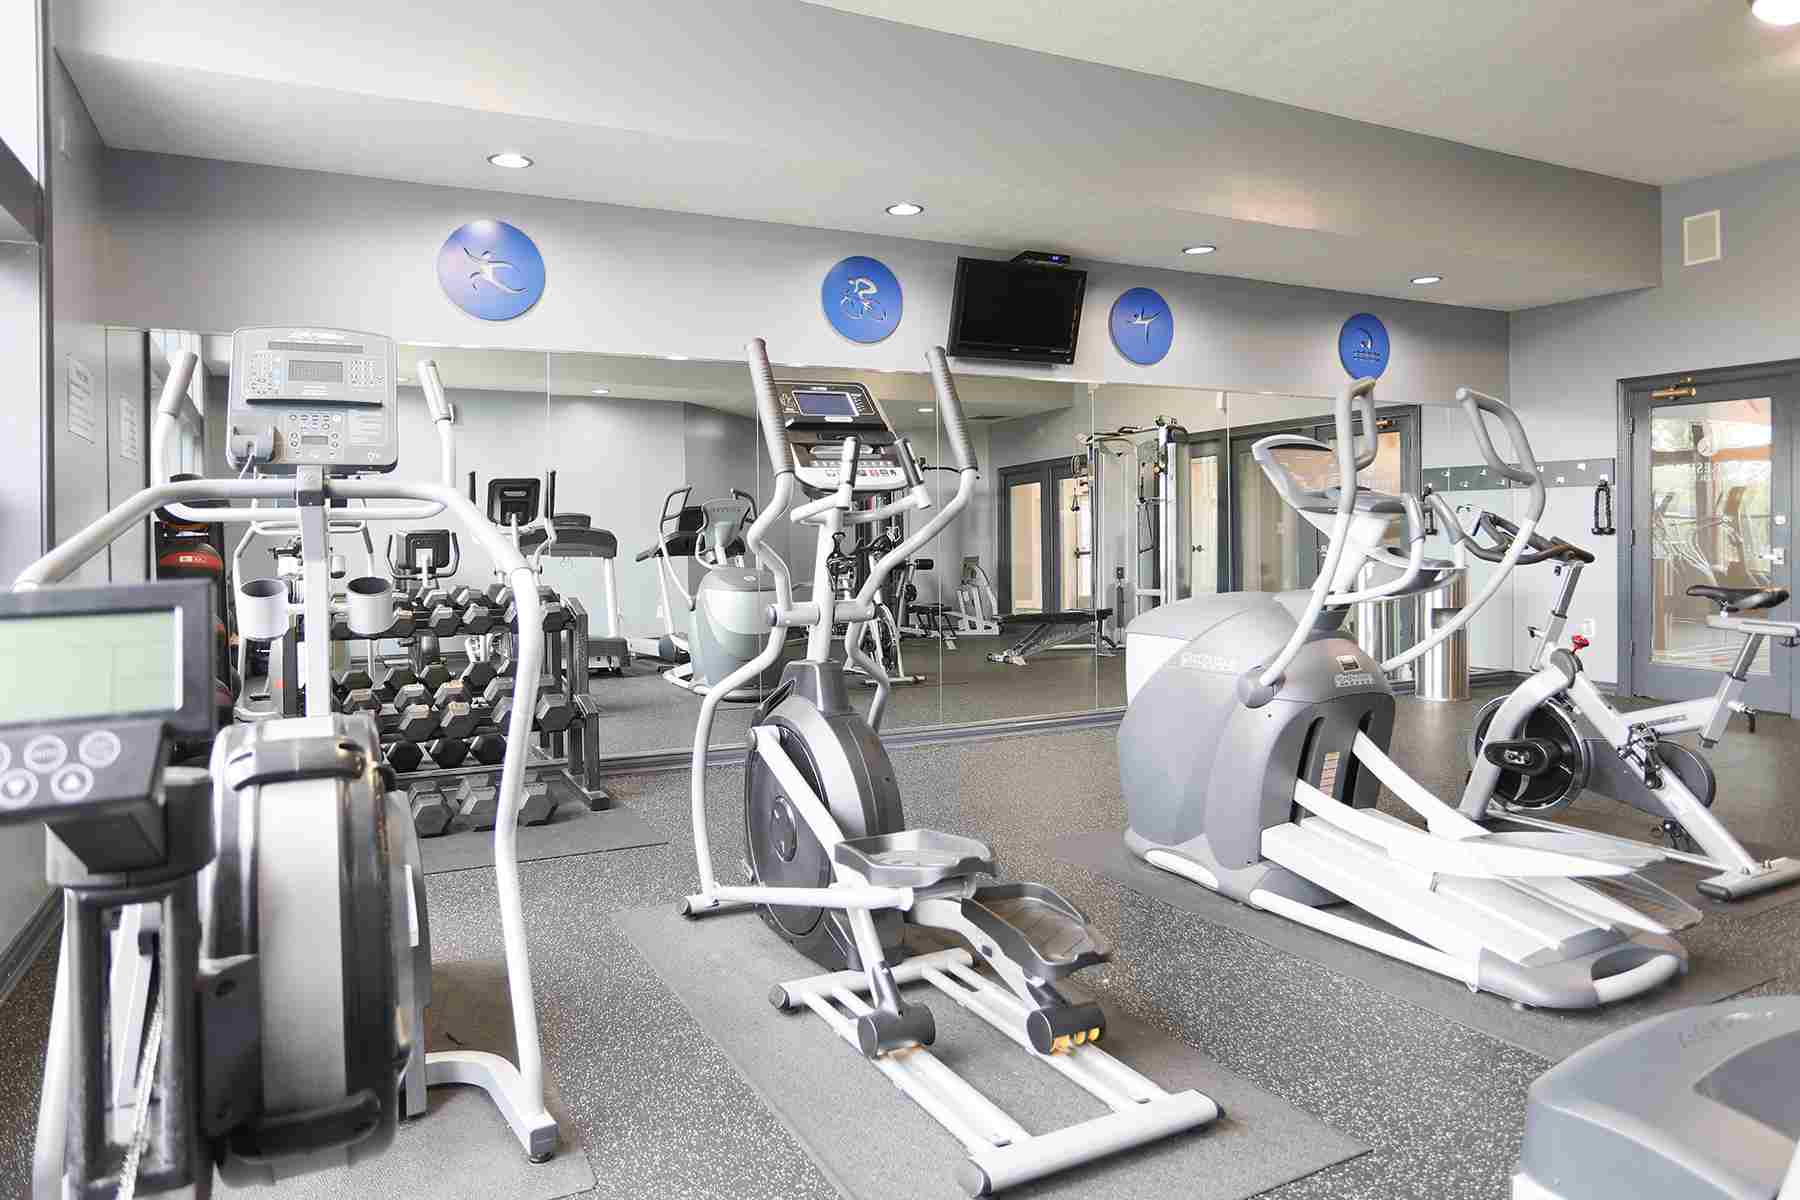 Fitness room equipped with cardio machines.